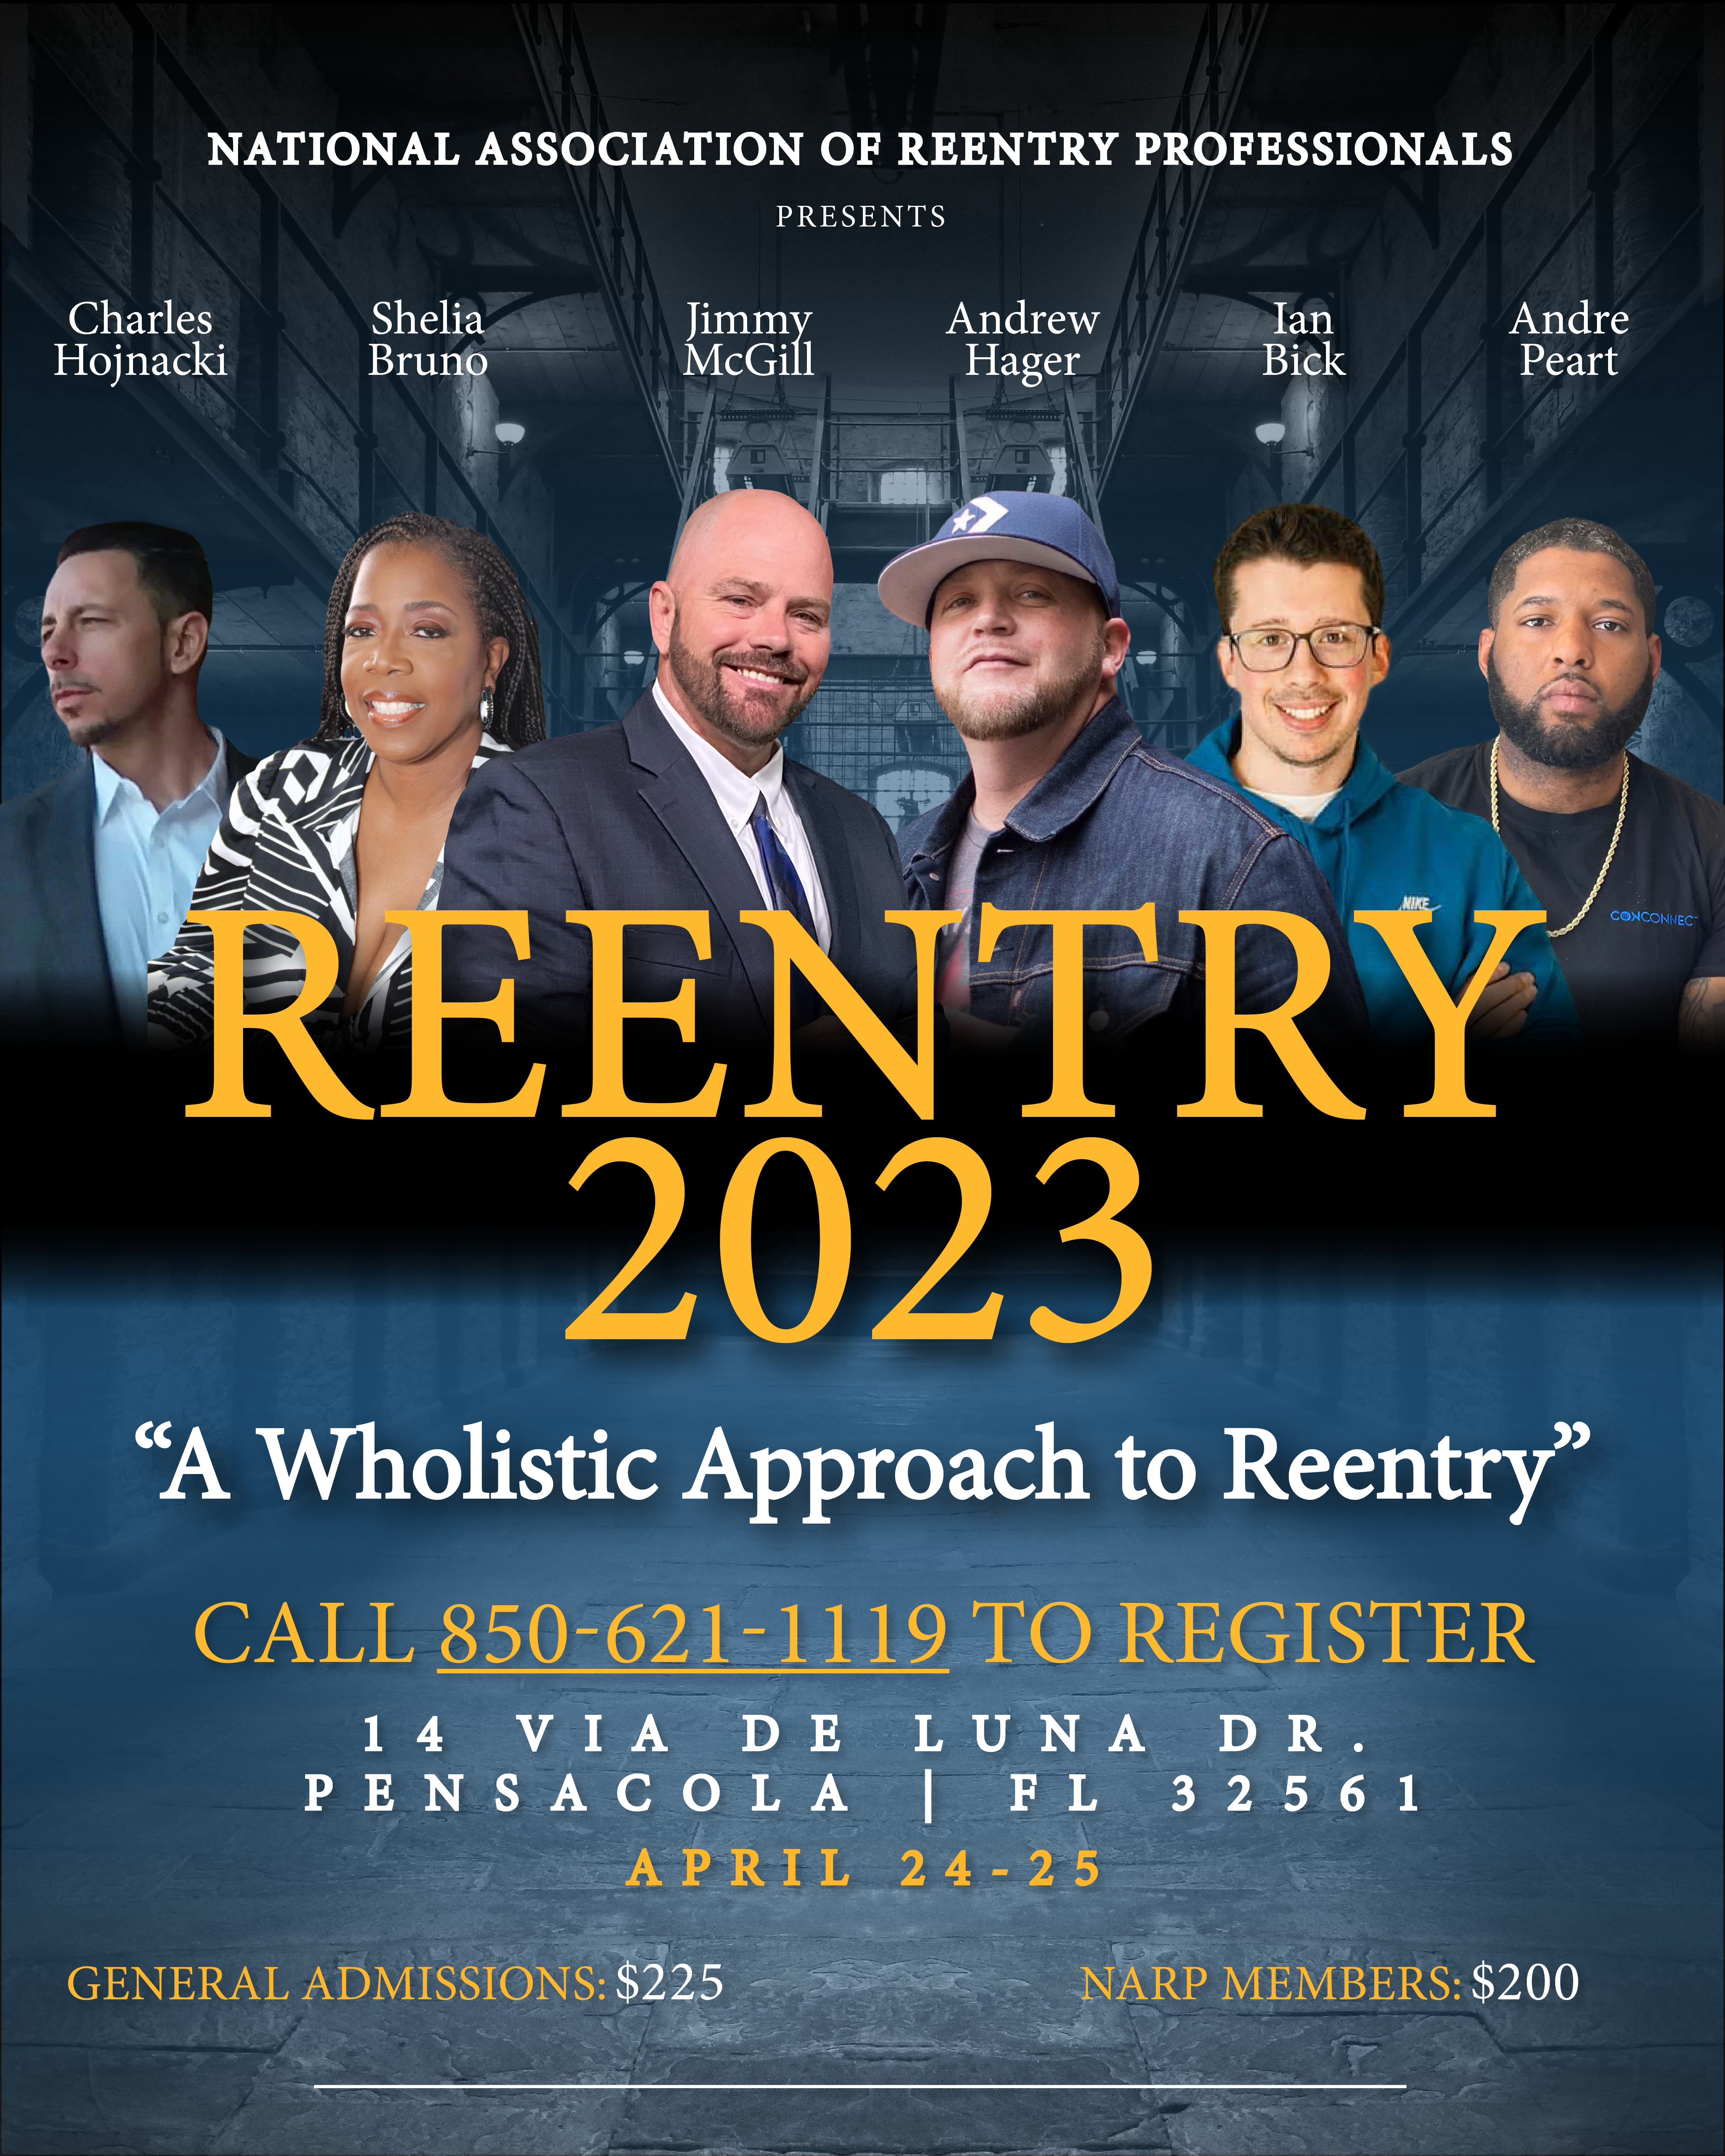 Reentry 2023: A Wholistic Approach to Reentry Flyer